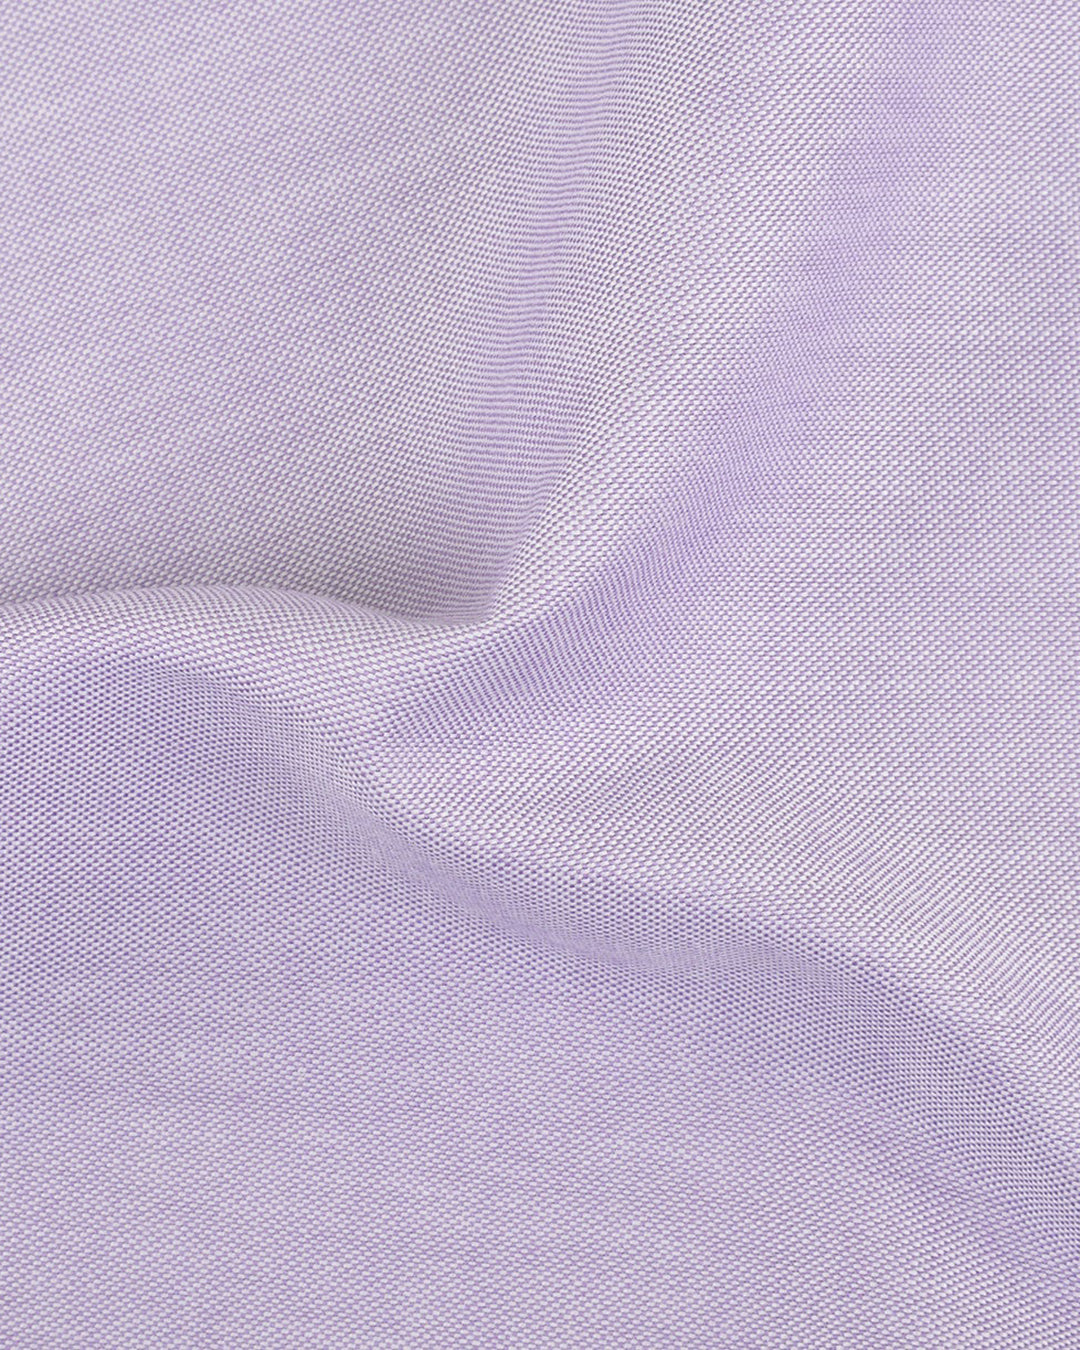 Lilac Pinpoint Oxford Shirt